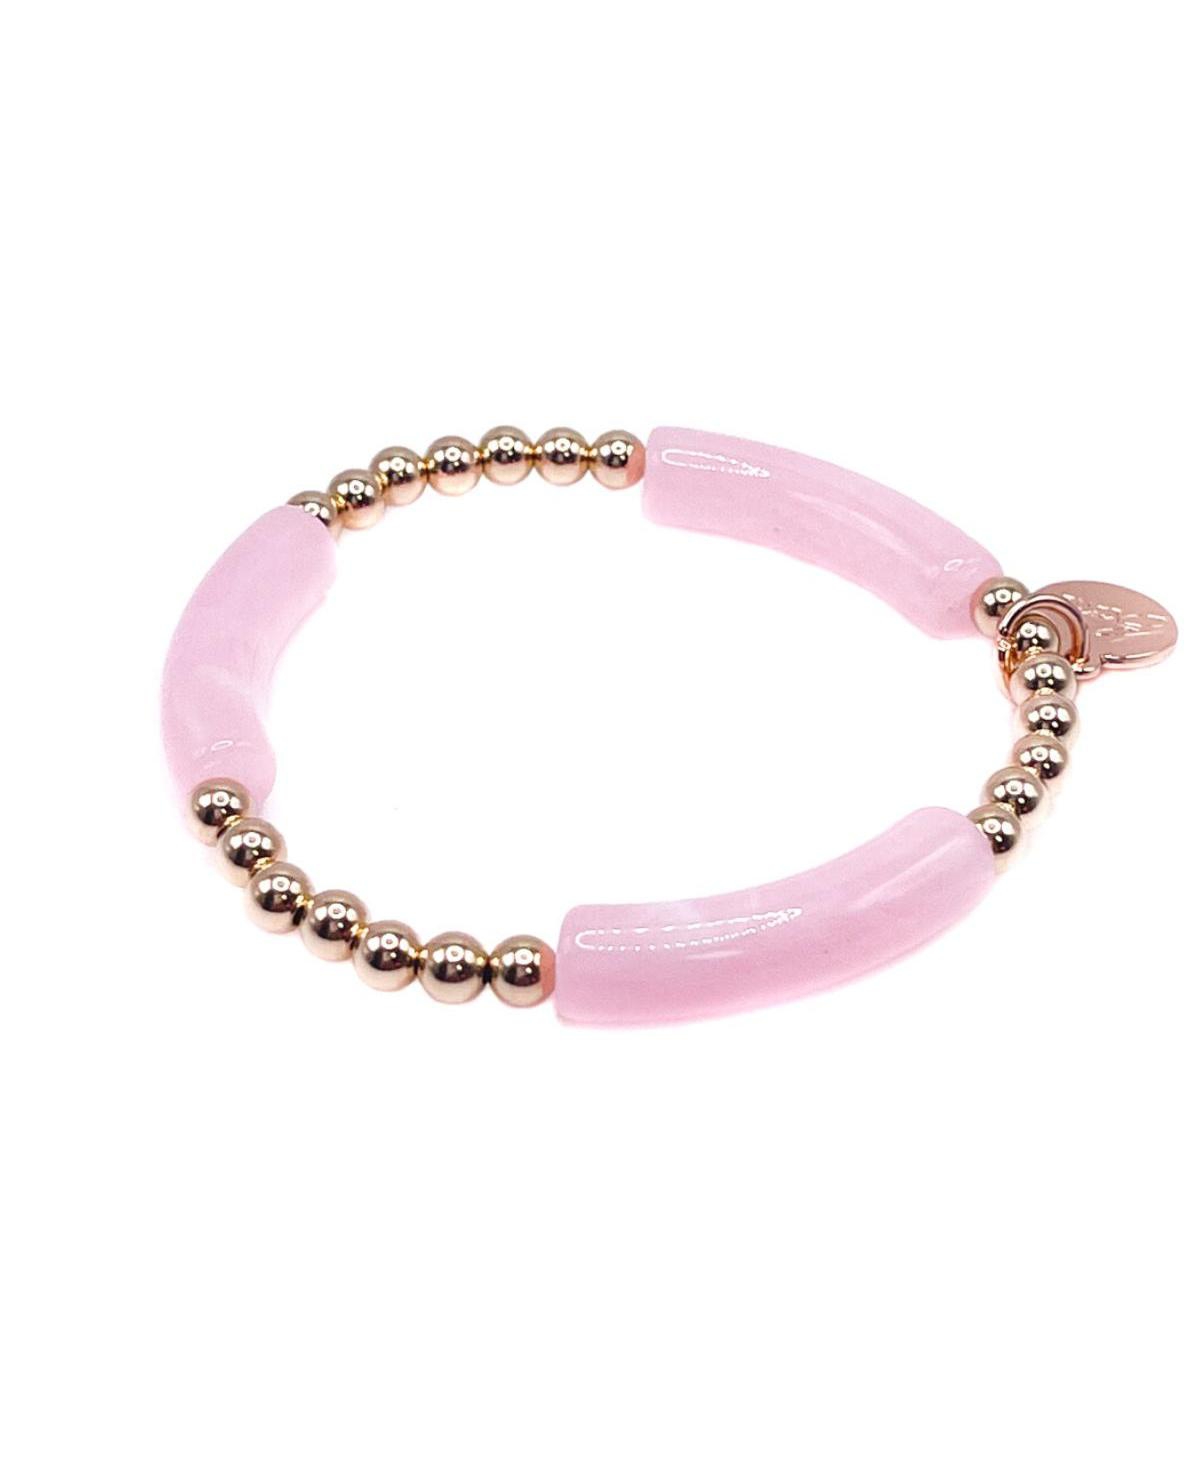 Non-Tarnishing Gold filled, 5mm Gold Ball and Acrylic Stretch Bracelet - Pink lemonade